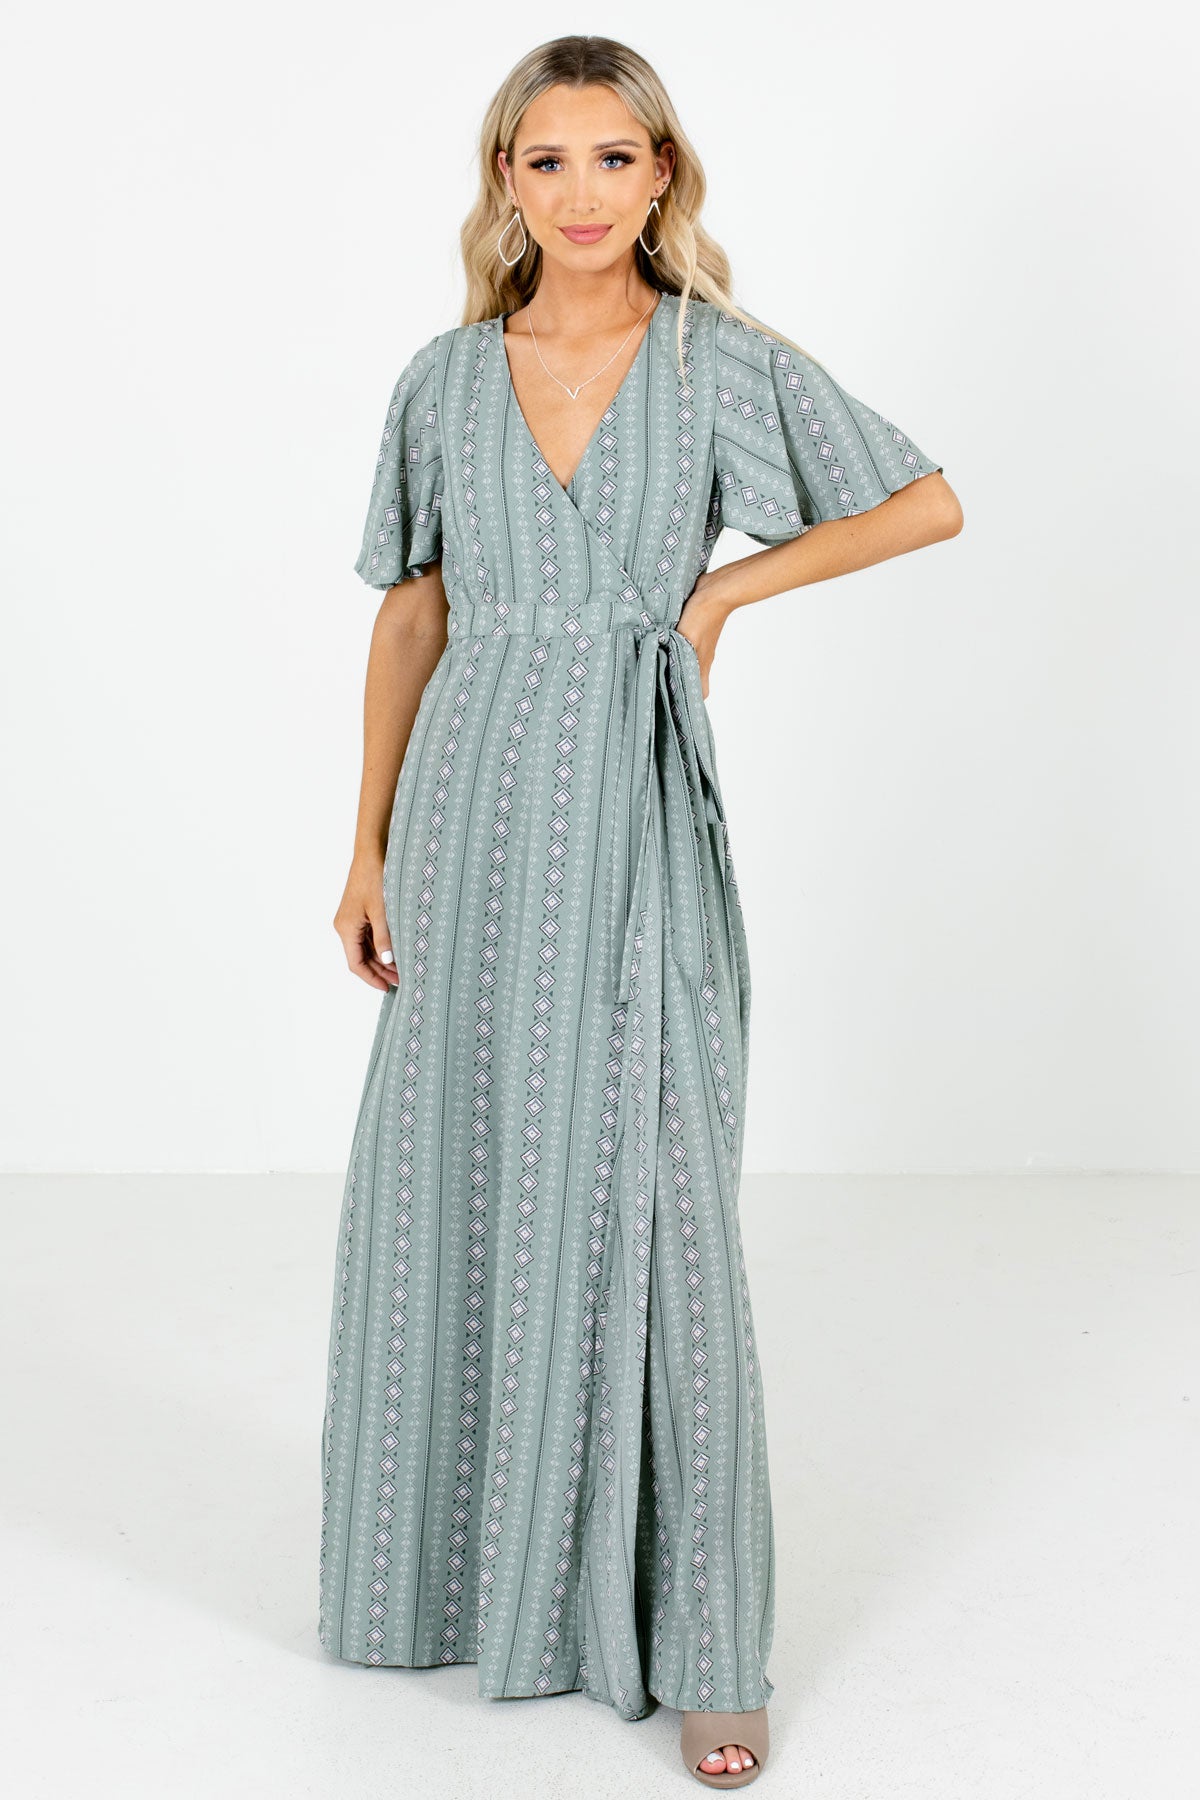 Sage Green Wrap Style Boutique Maxi Dresses for Women